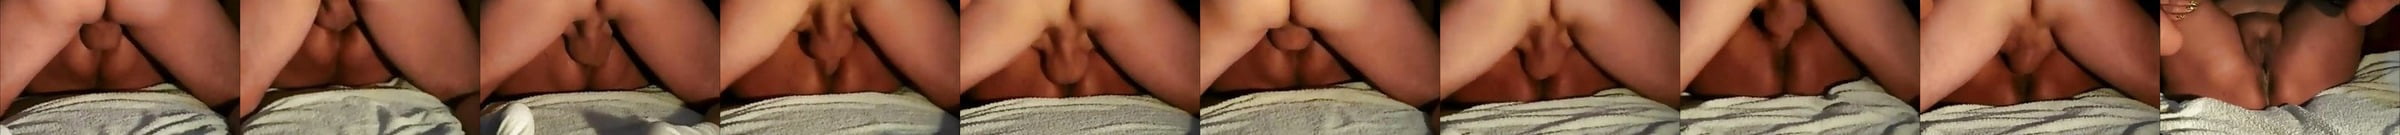 Featured Loud Anal With My Friend Porn Videos XHamster